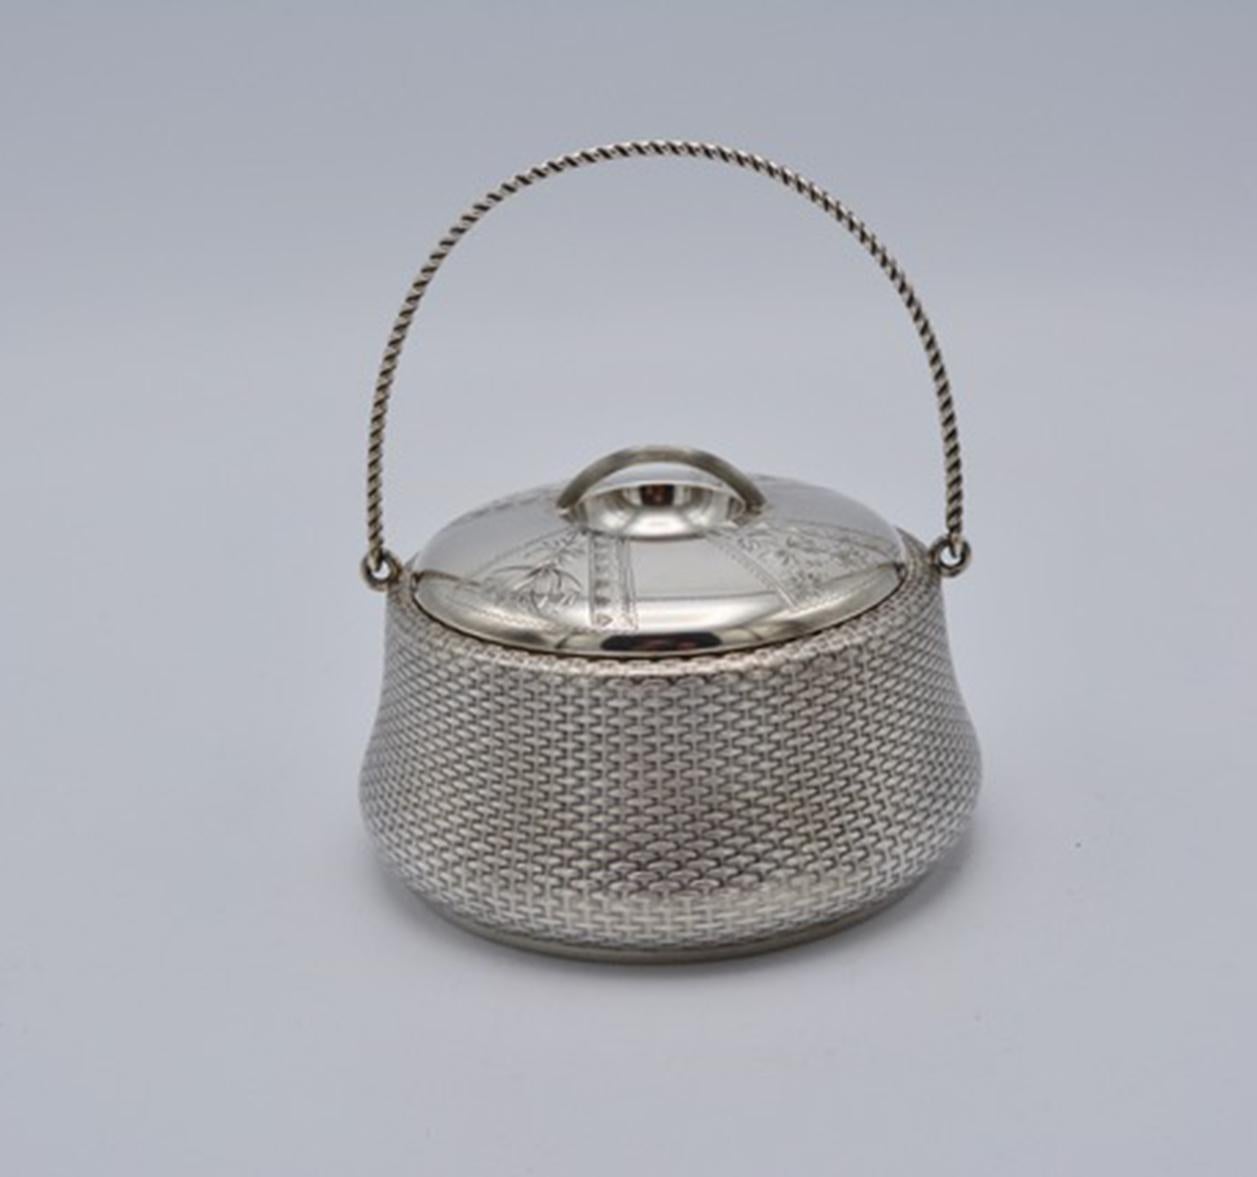 Hand-Crafted Unique Wood and Hughes 3-Piece Sterling Silver Japaneseque Basket-Weave Tea Set